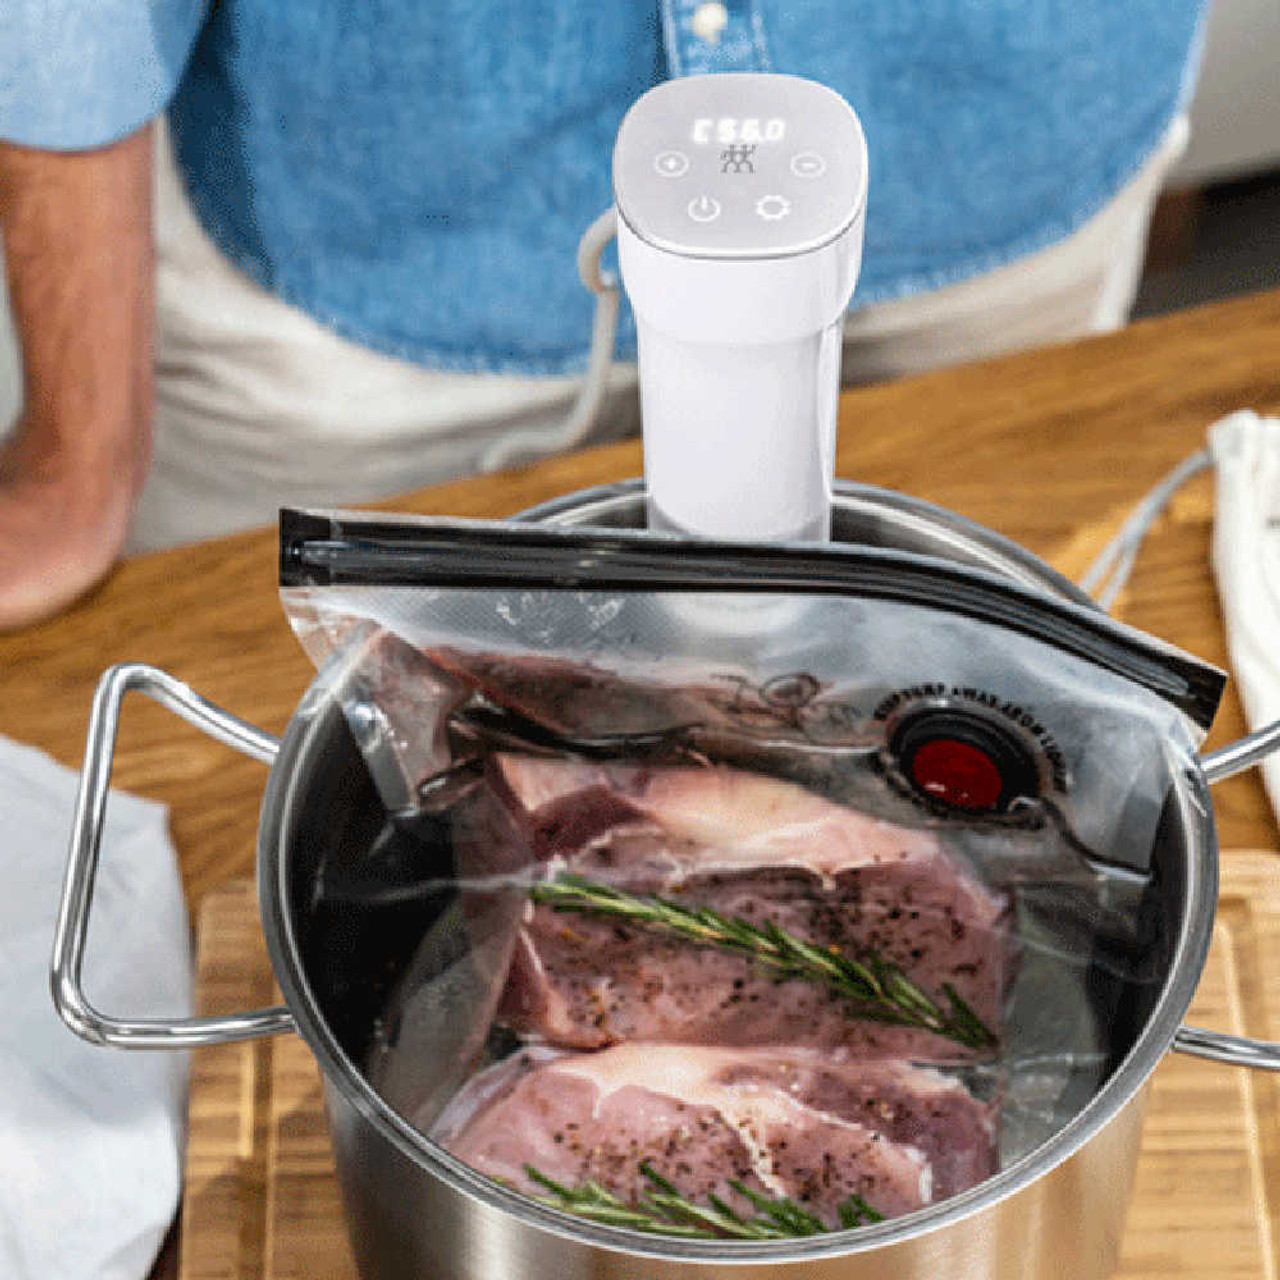 All Clad Sous Vide Immersion Circulator